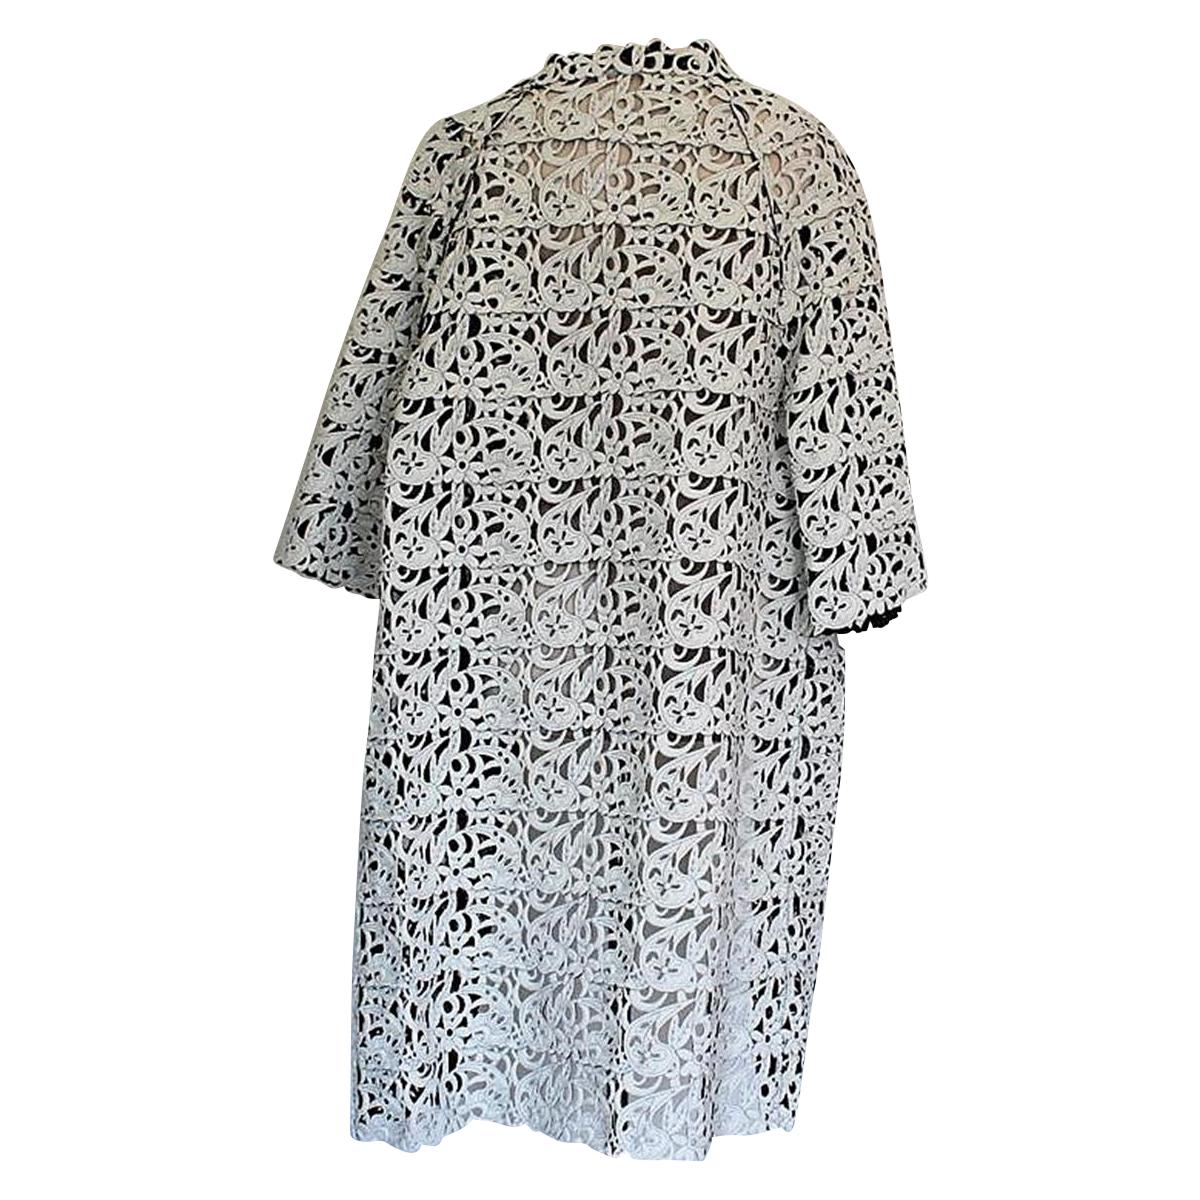 Very chic overcoat by Gianluca Capannolo
Beautiful cut & fit
Polyamide (80%) and elasthane (20%)
Black and white
Double face
Floral pattern
3/4 Sleeve
Total length cm 109 (42.9 inches)
Brand new with tags
Worldwide express shipping included in the